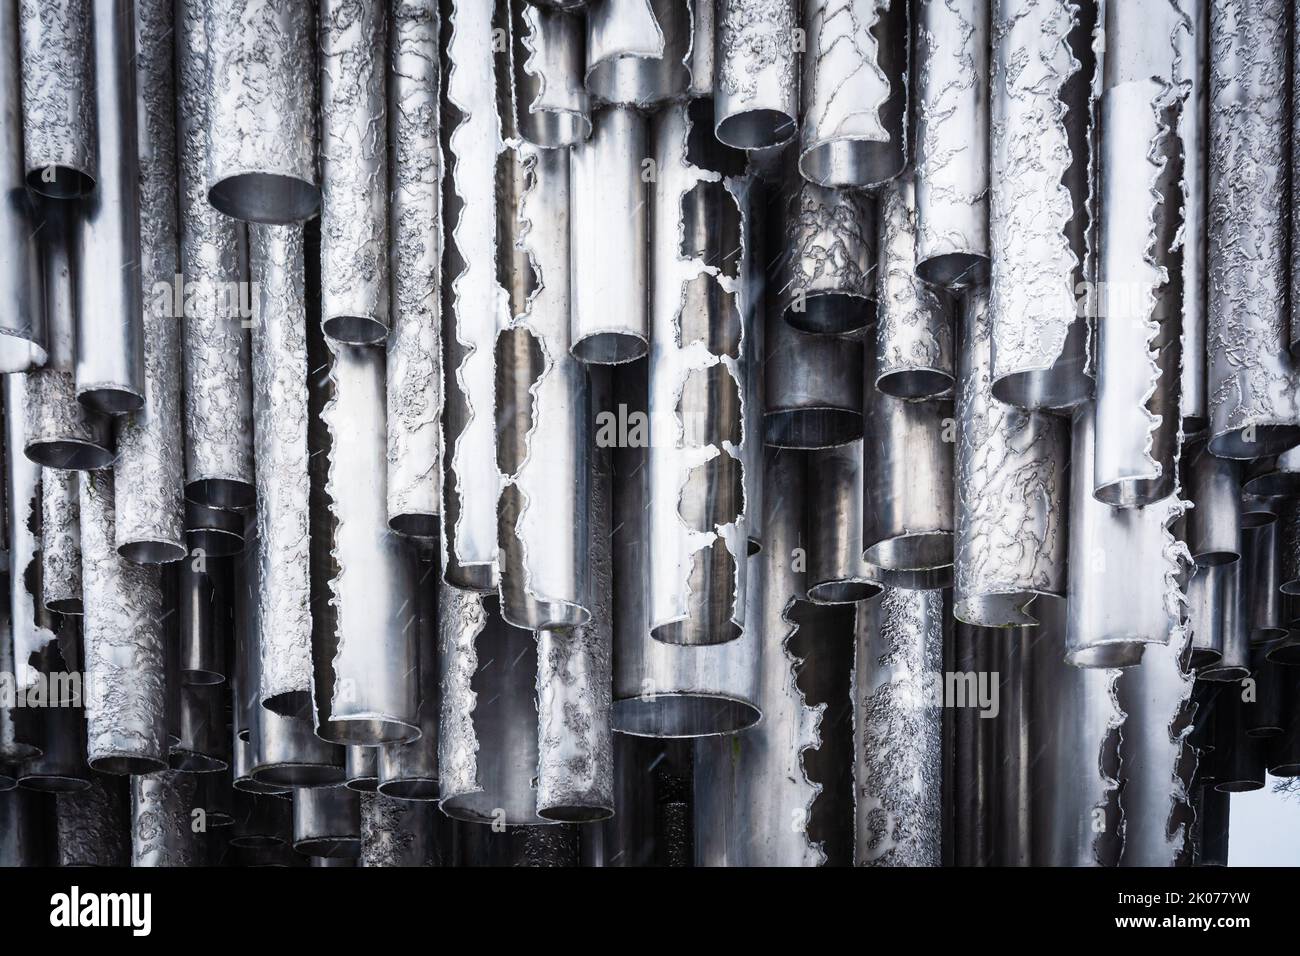 Sibelius monument titled Passio Musicae by Eila Hiltunen at Sibelius park in Helsinki Finland Stock Photo